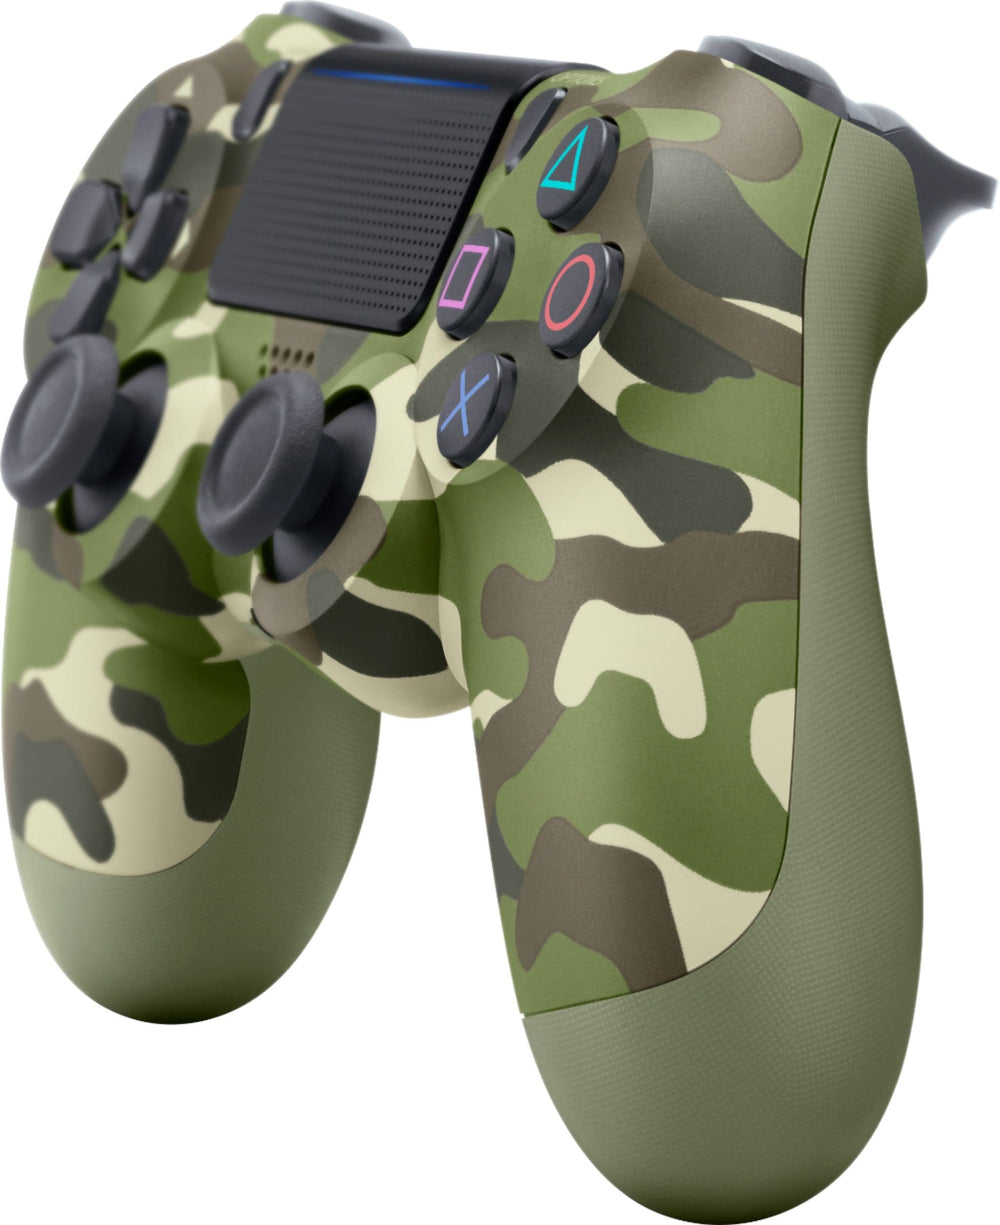 DualShock 4 Wireless Controller for Sony PlayStation 4 - Green Camouflage_1